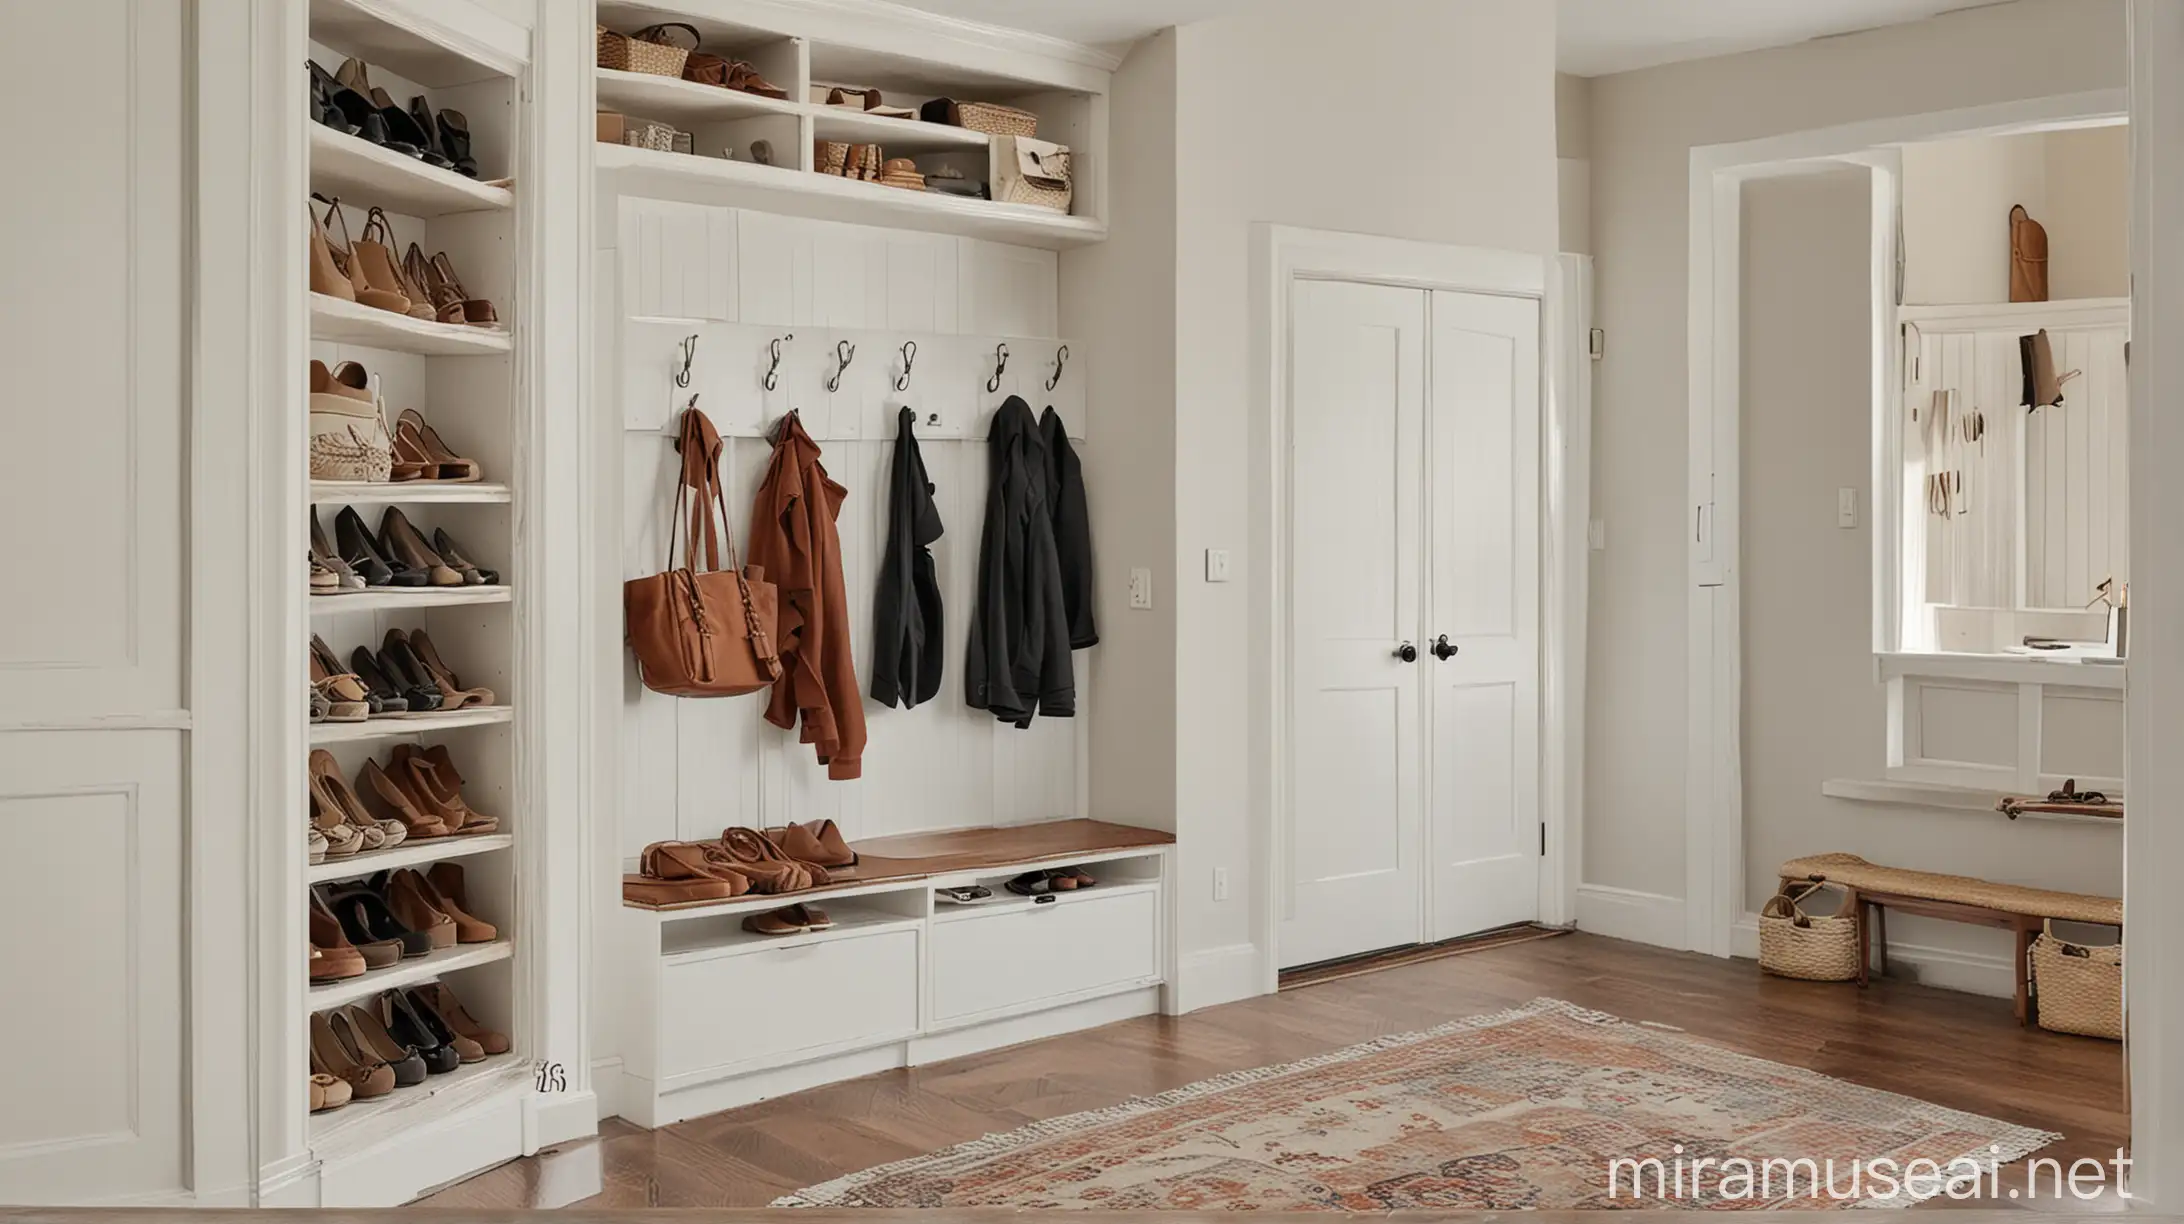 A functional entryway with built-in storage for shoes, coats, and bags.